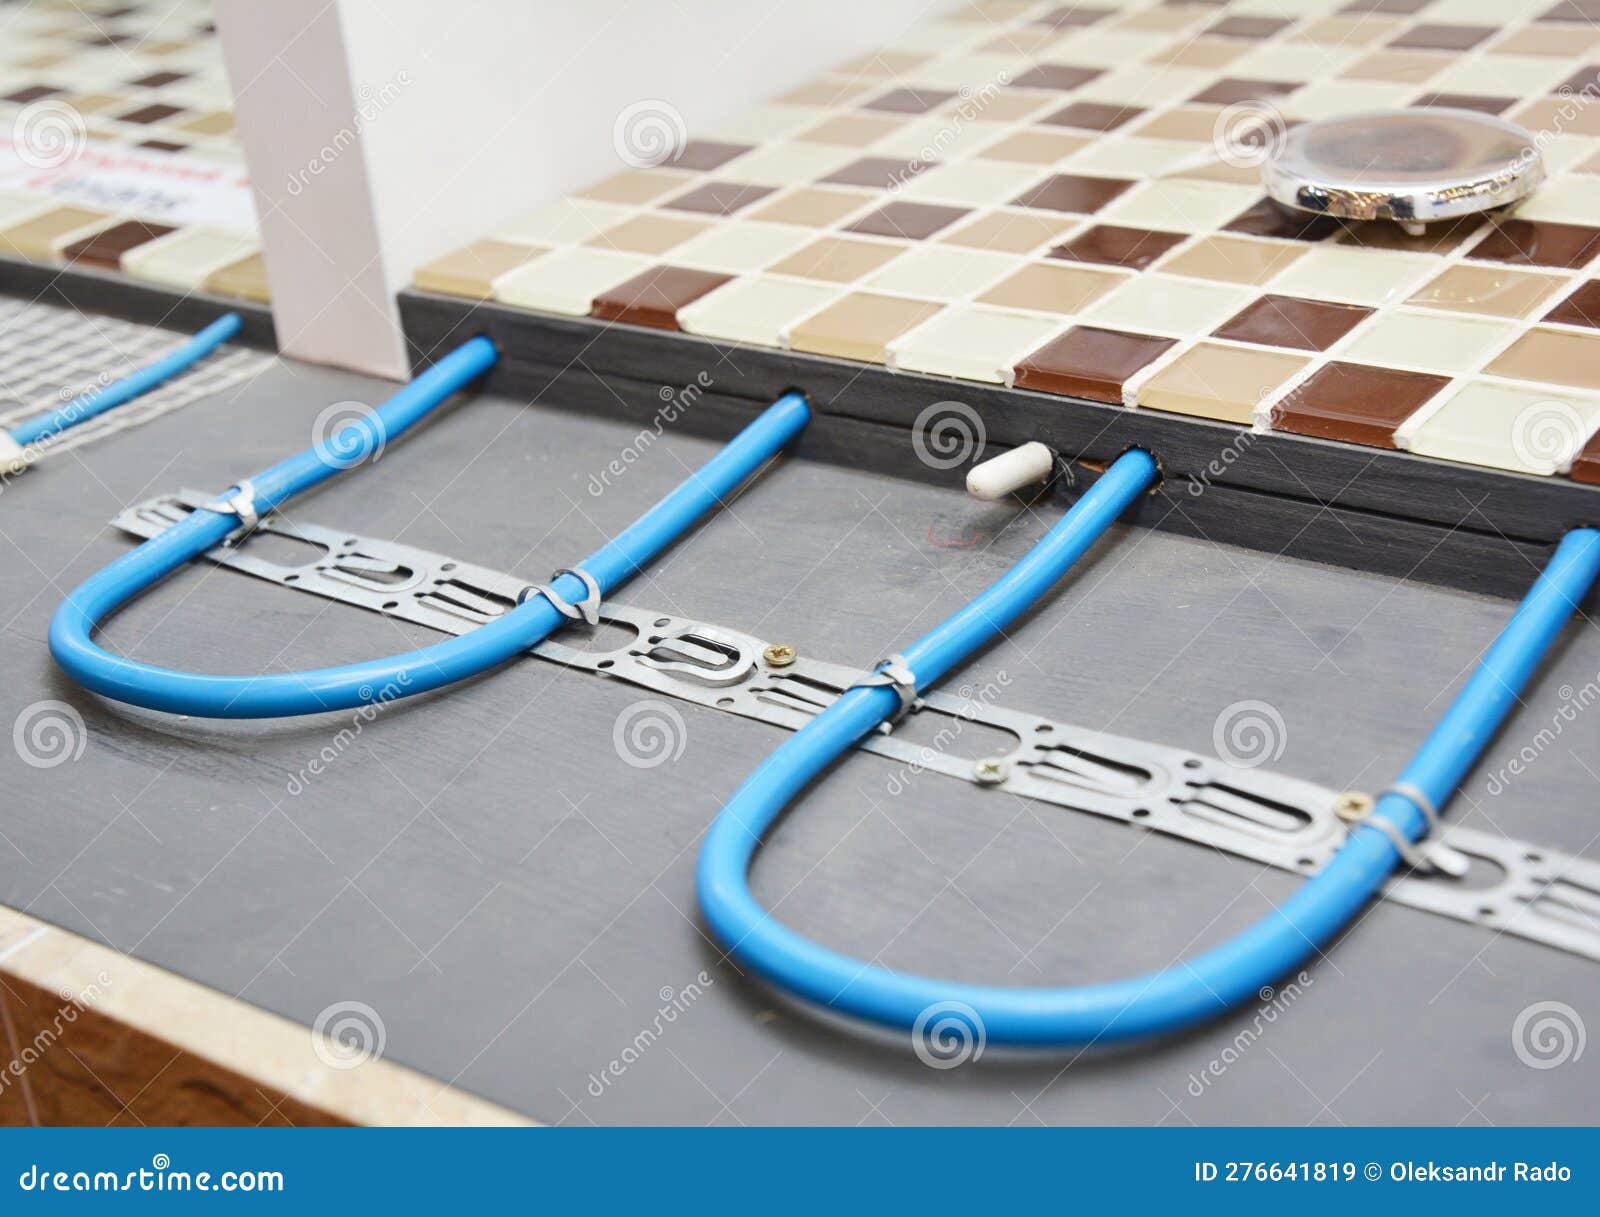 electric radiant flooring installation concept. installing radiant heat flooring or heated floor system in the bathroom during